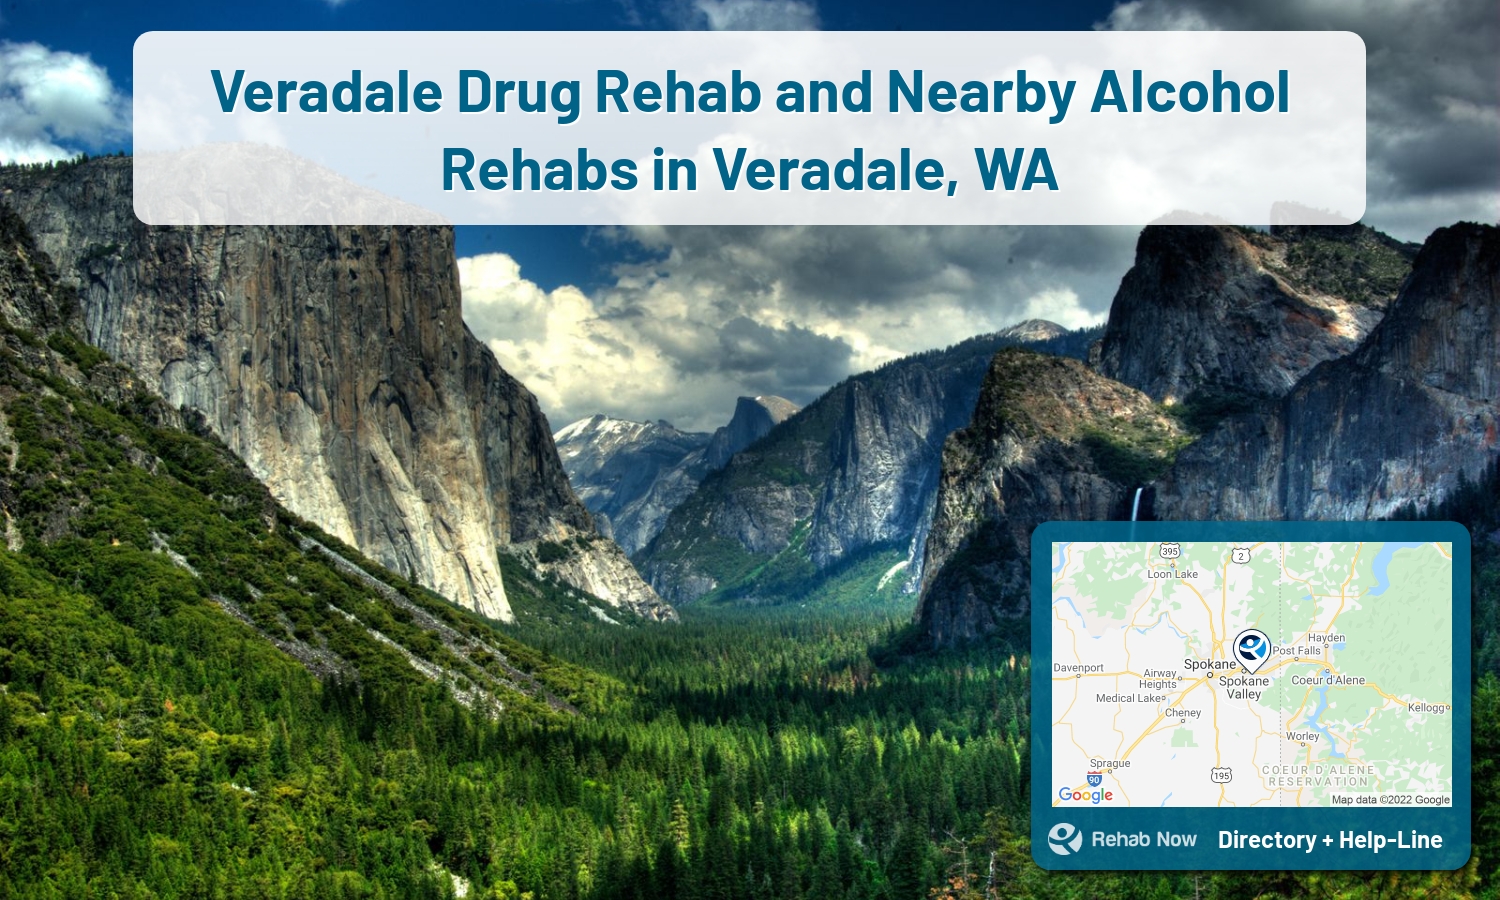 Let our expert counselors help find the best addiction treatment in Veradale, Washington now with a free call to our hotline.